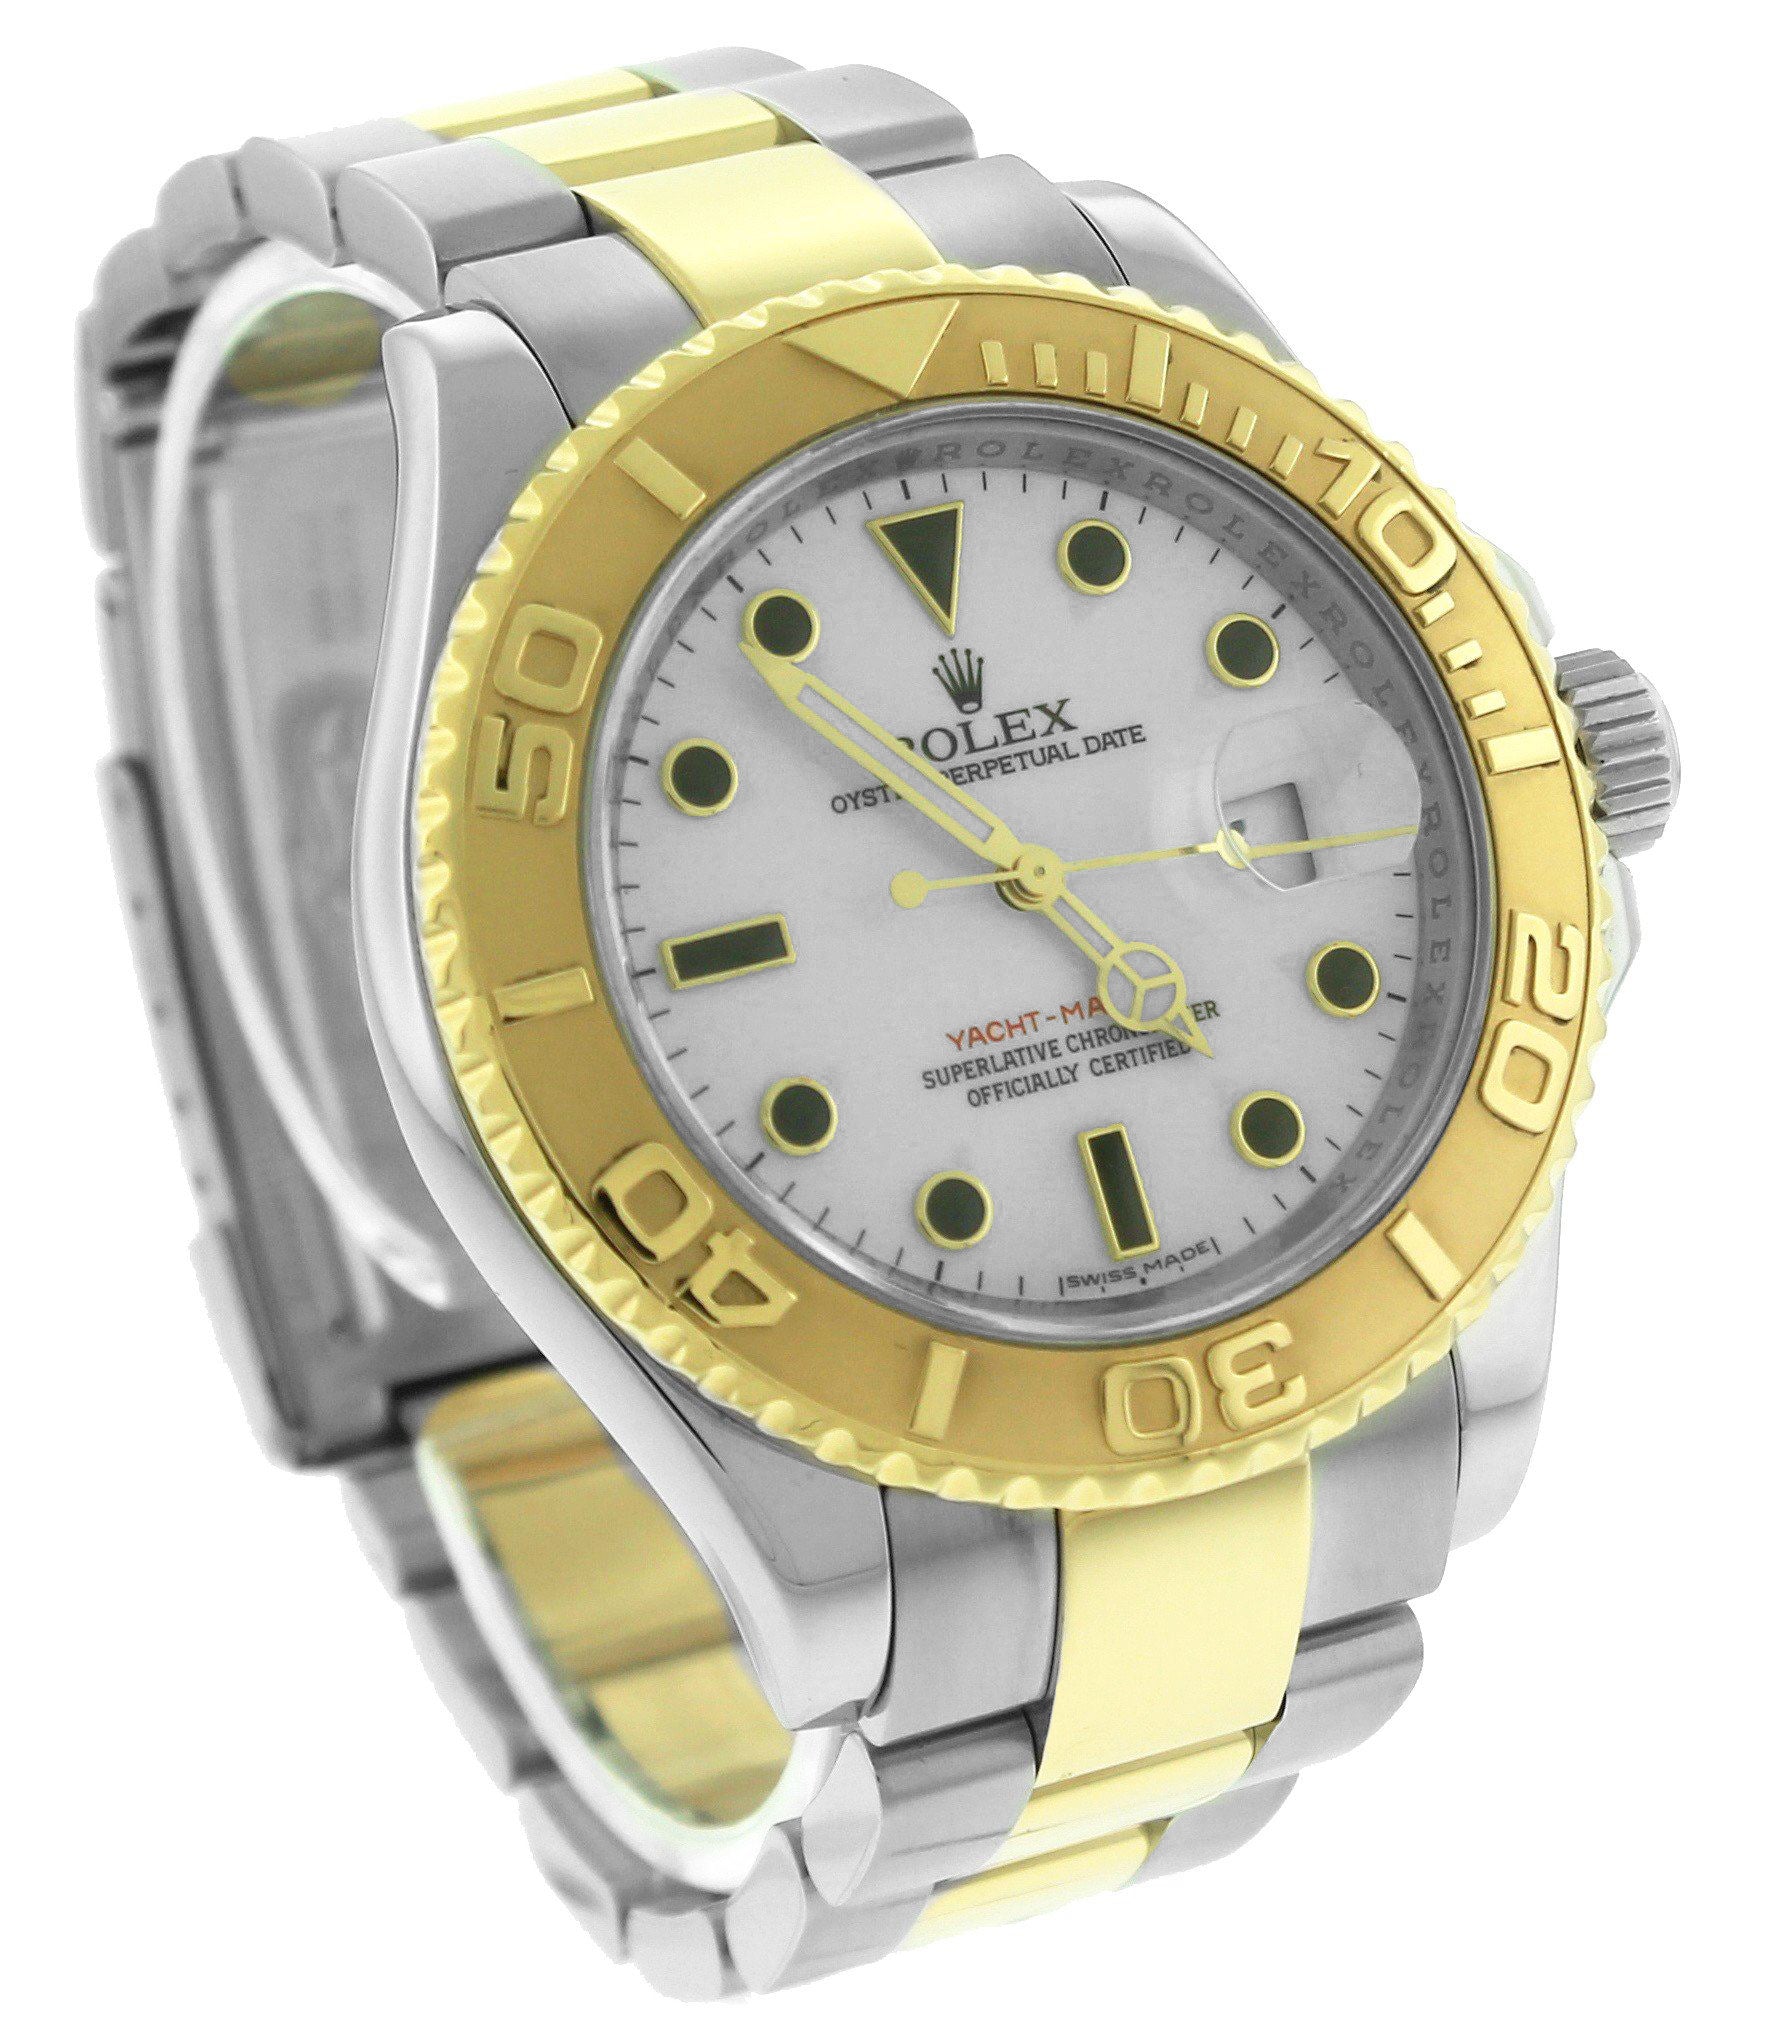 ENGRAVED Rolex Yacht-Master 40mm 18K Two-Tone Steel Gold White Date Watch 16623